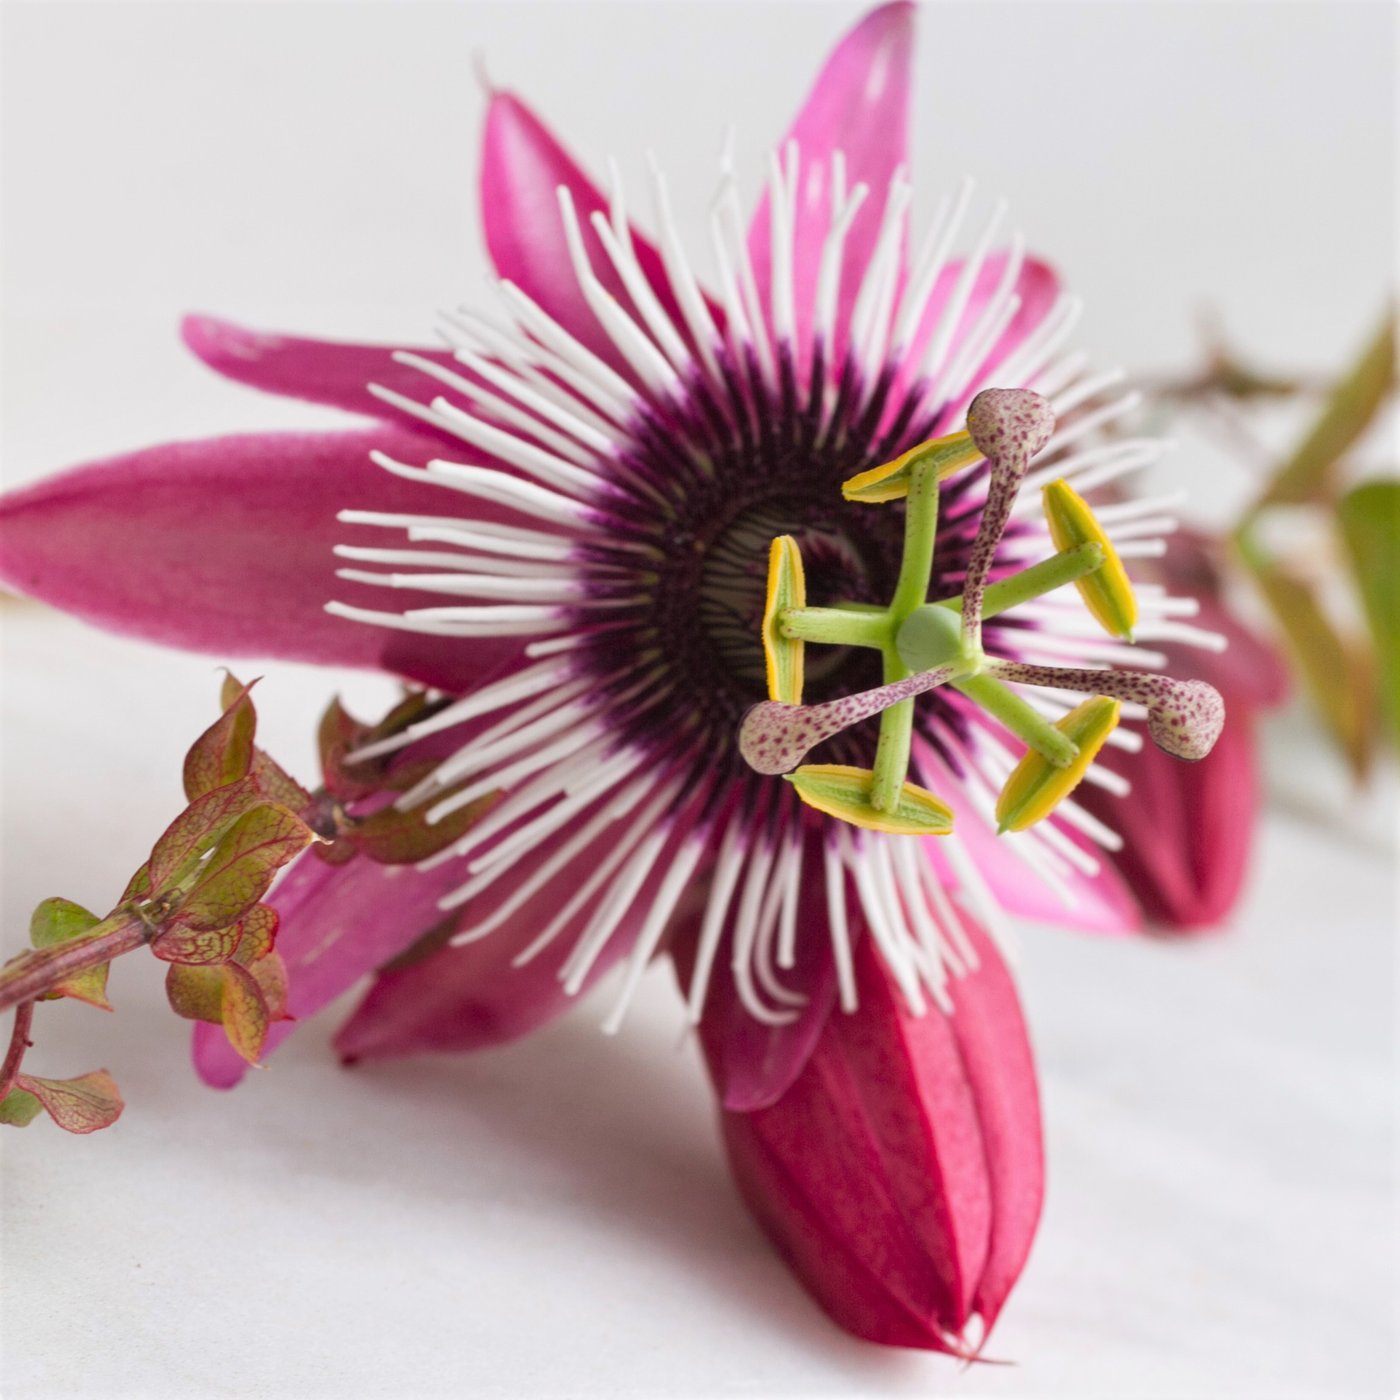 Passion Flower Passiflora Victoria (Edible Fruit!) – Easy To Grow Bulbs